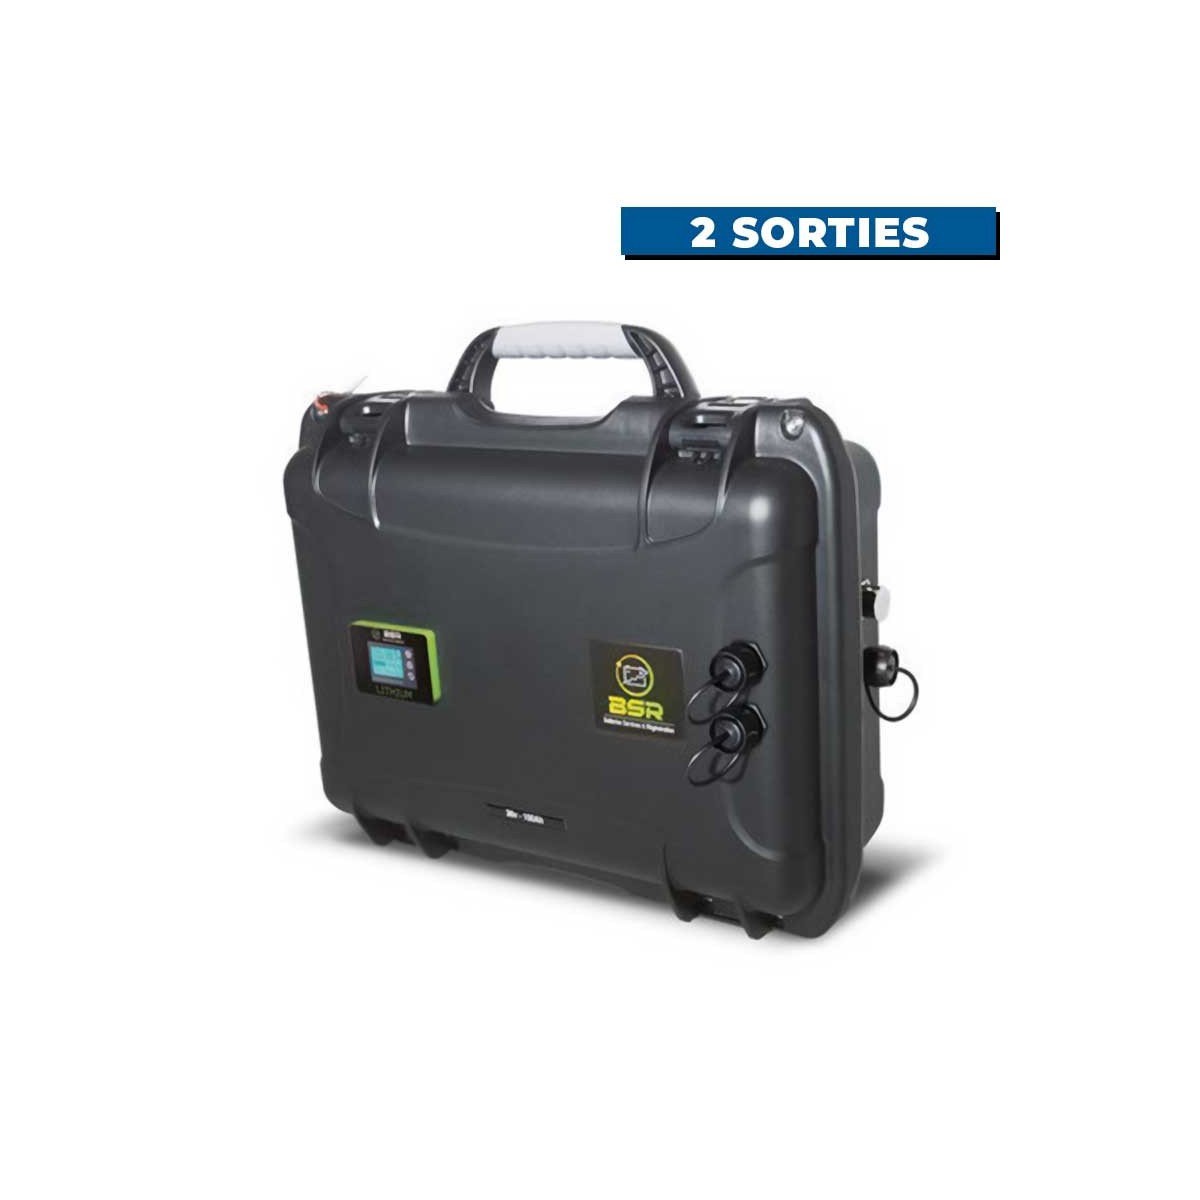 Valise lithium BSR LifePo4 Gen2 36V-100A 2 sorties